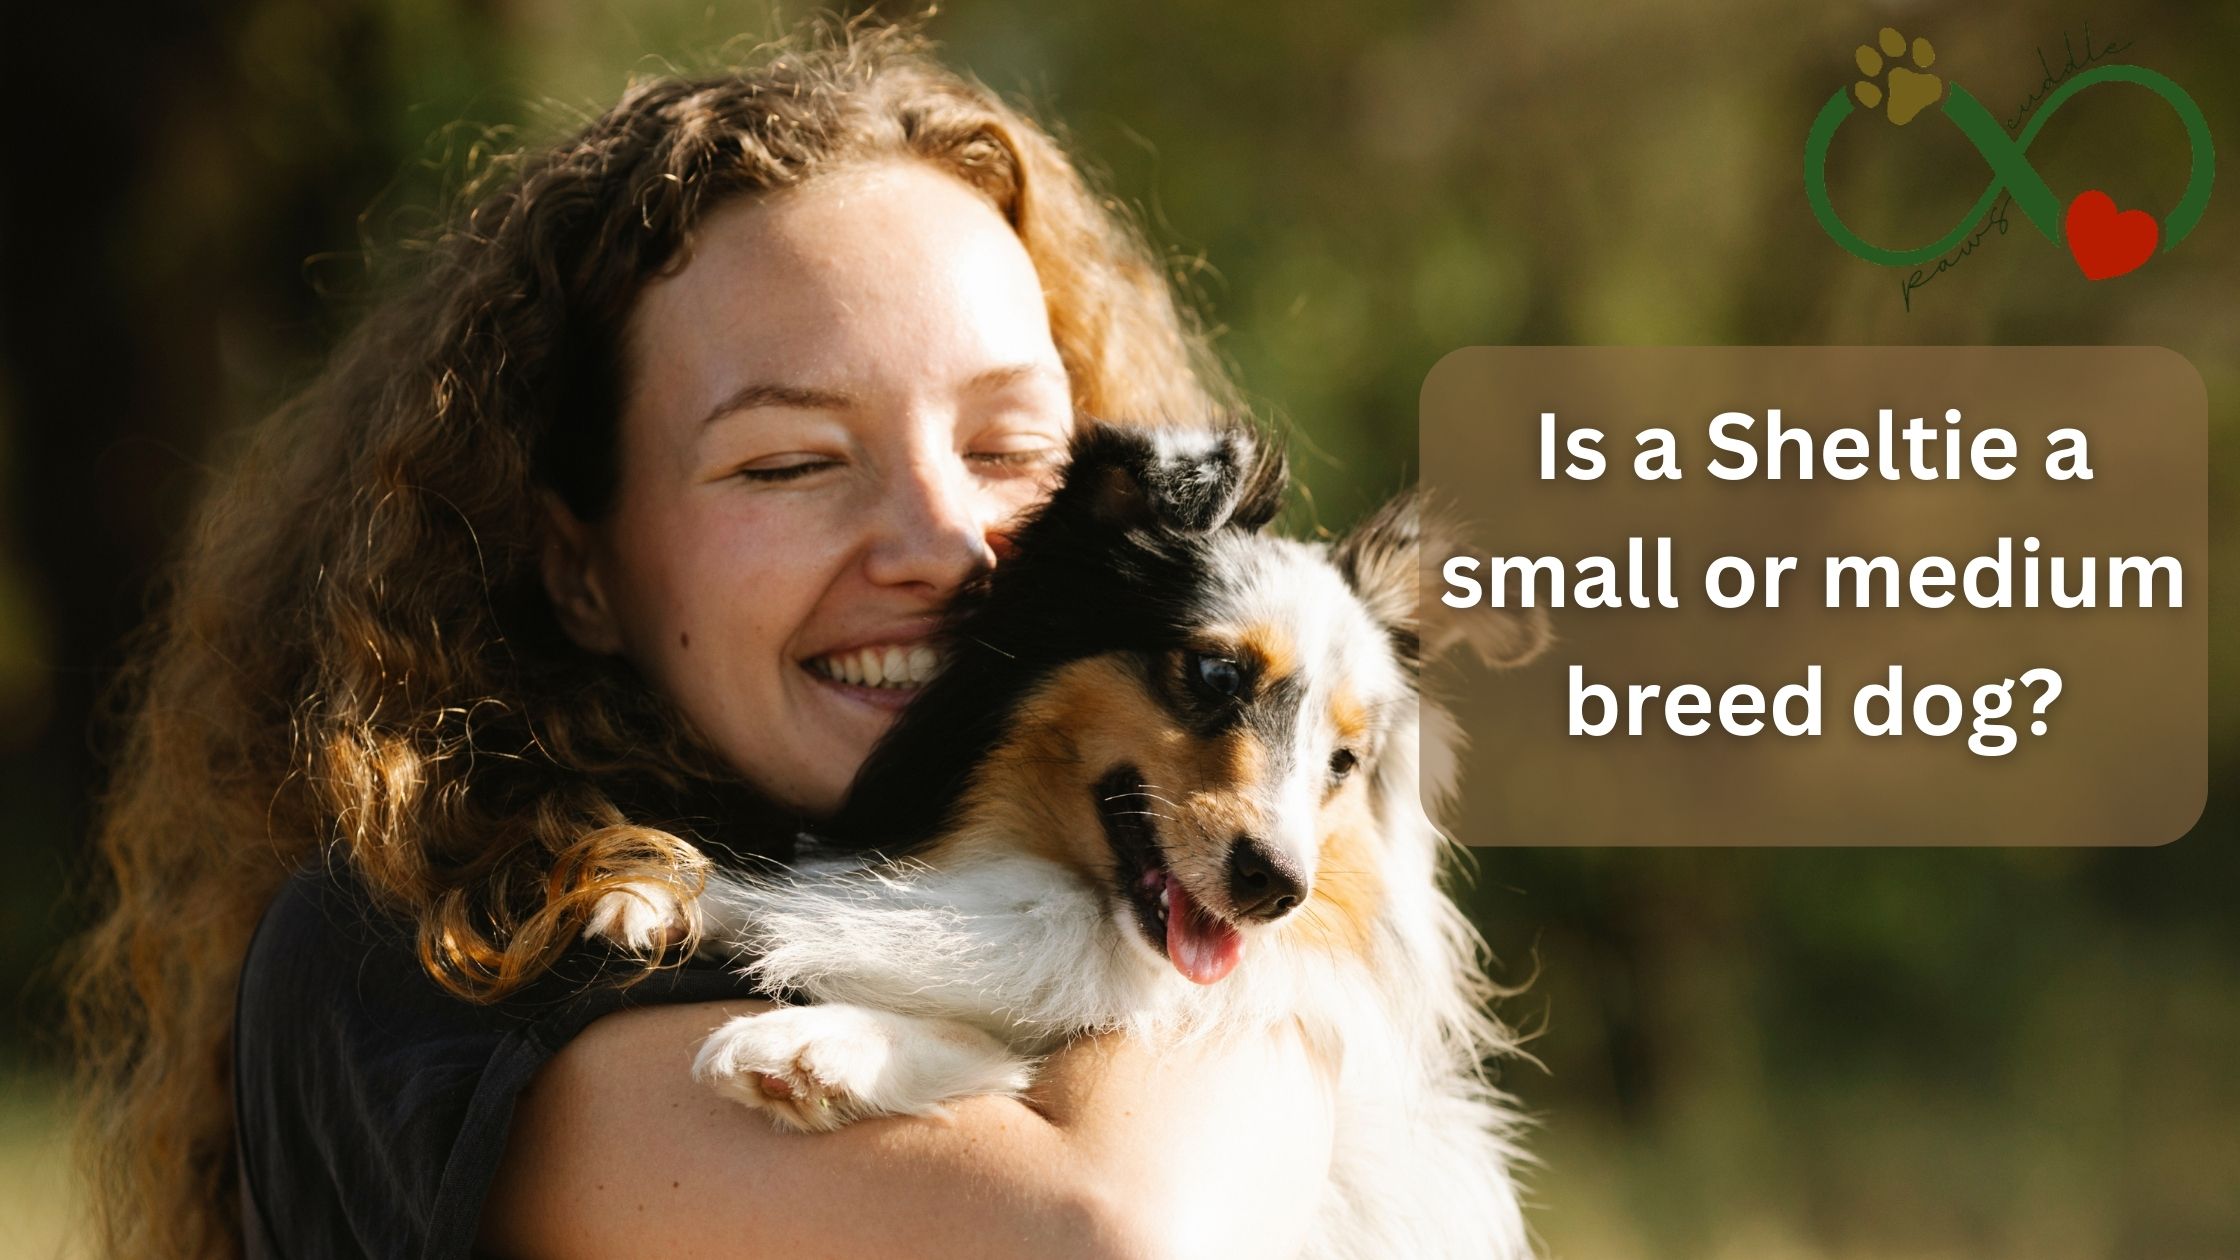 Is a Sheltie a small or medium breed dog?